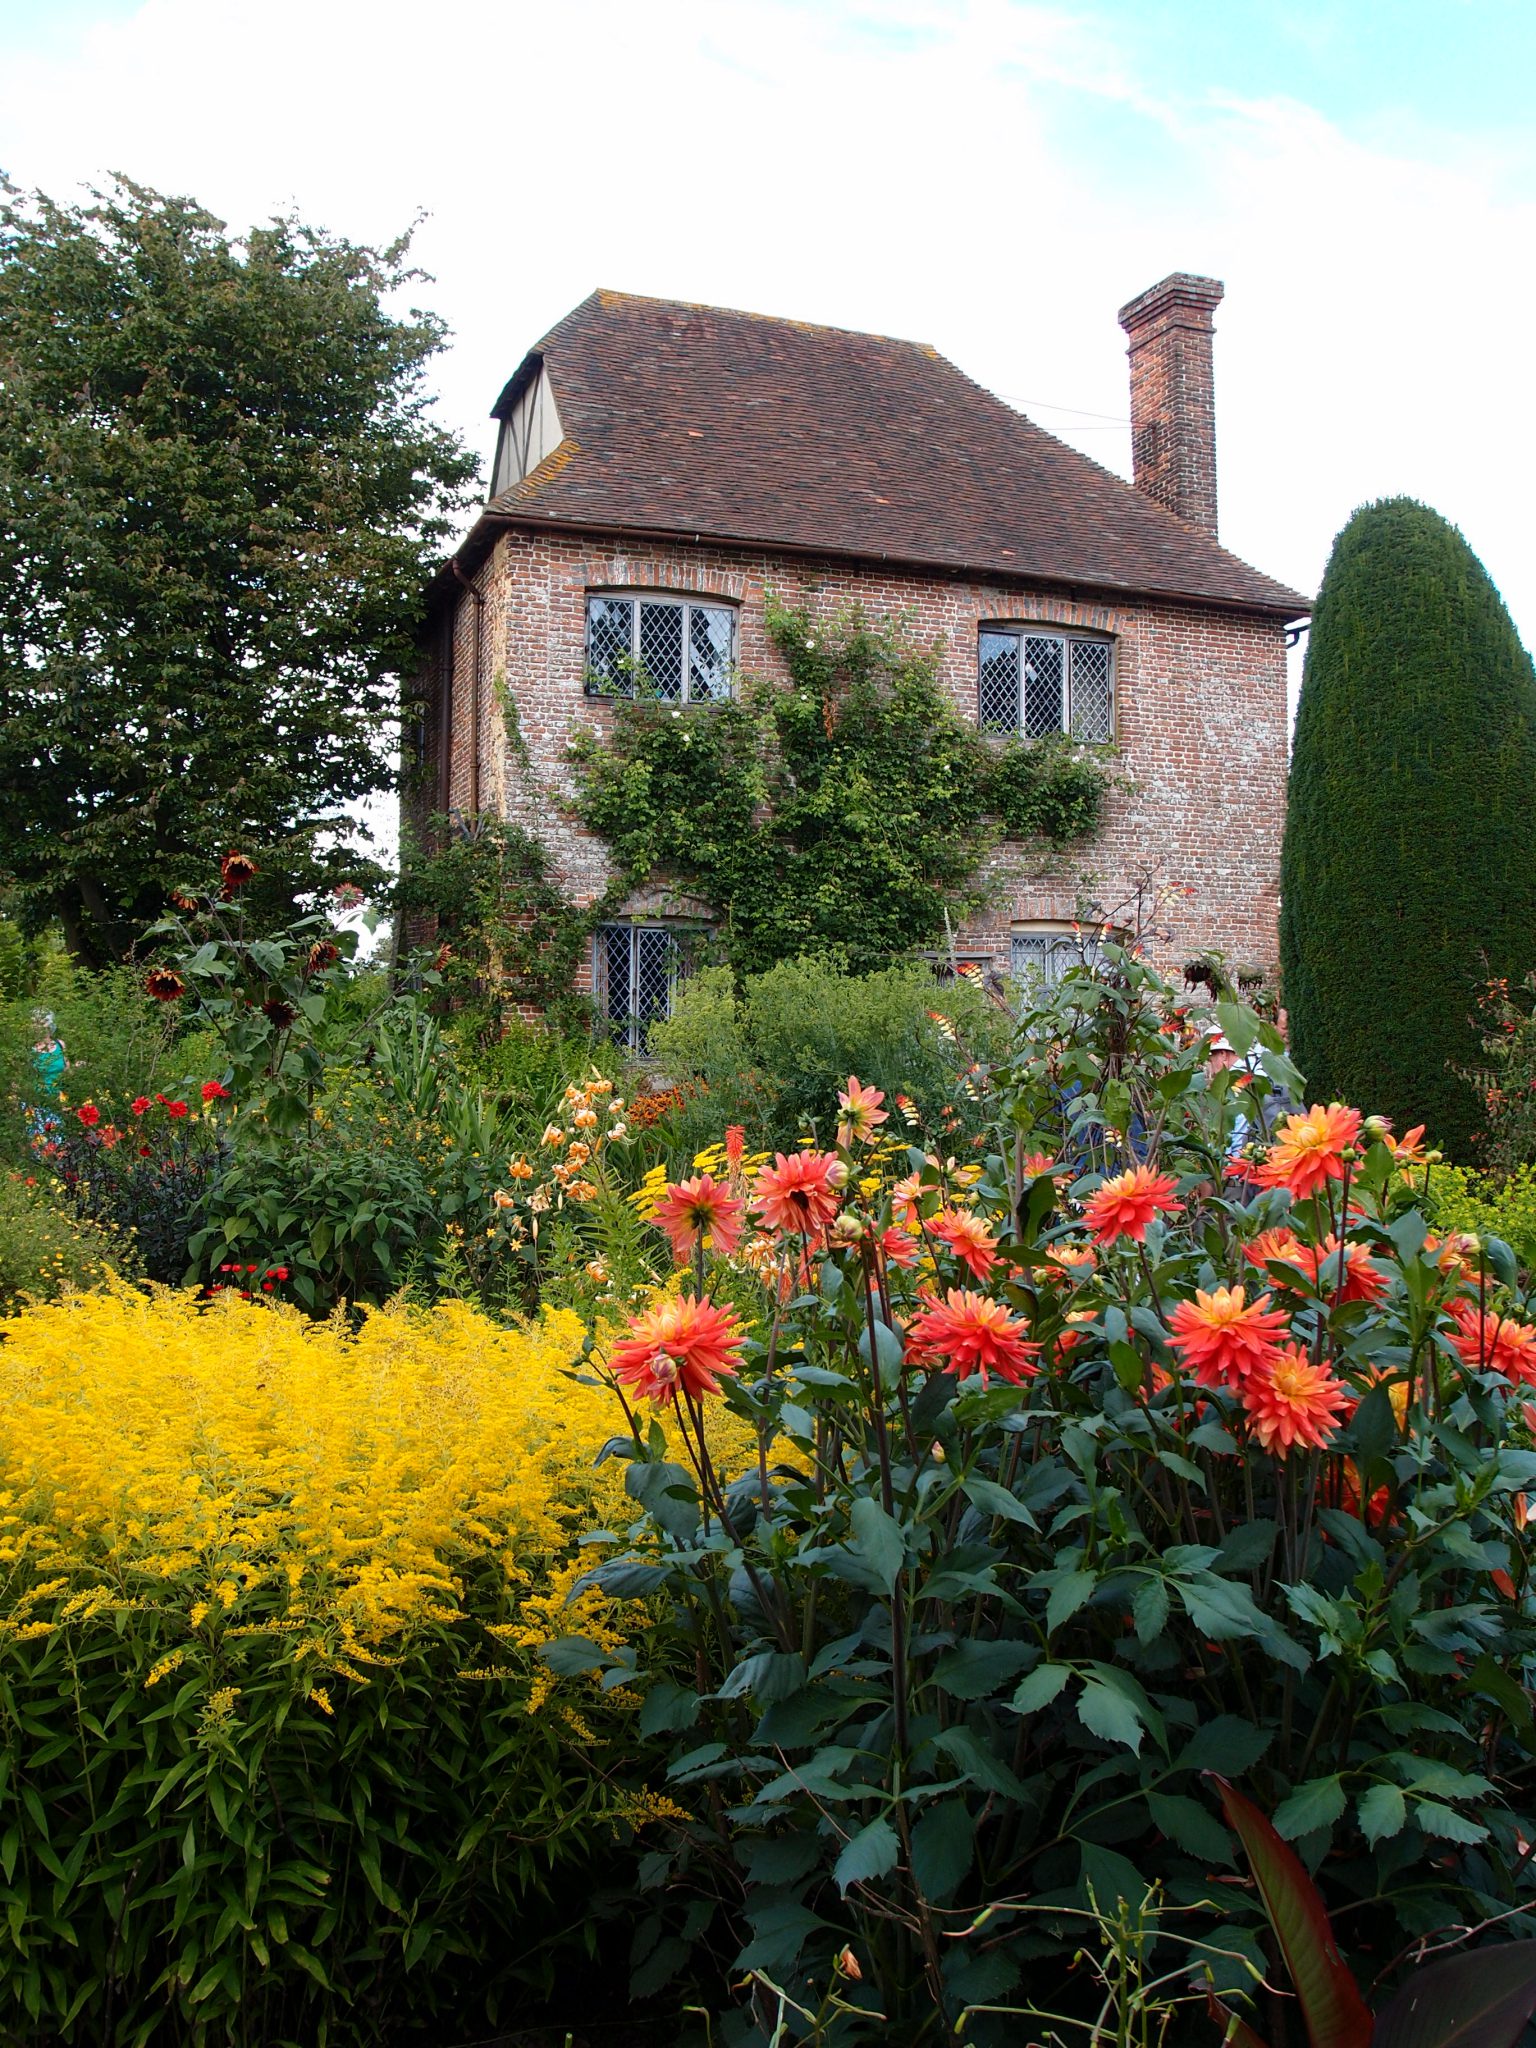 We're in the Cottage Garden. The South Cottage is a fragment of the Elizabeth complex of buildings.